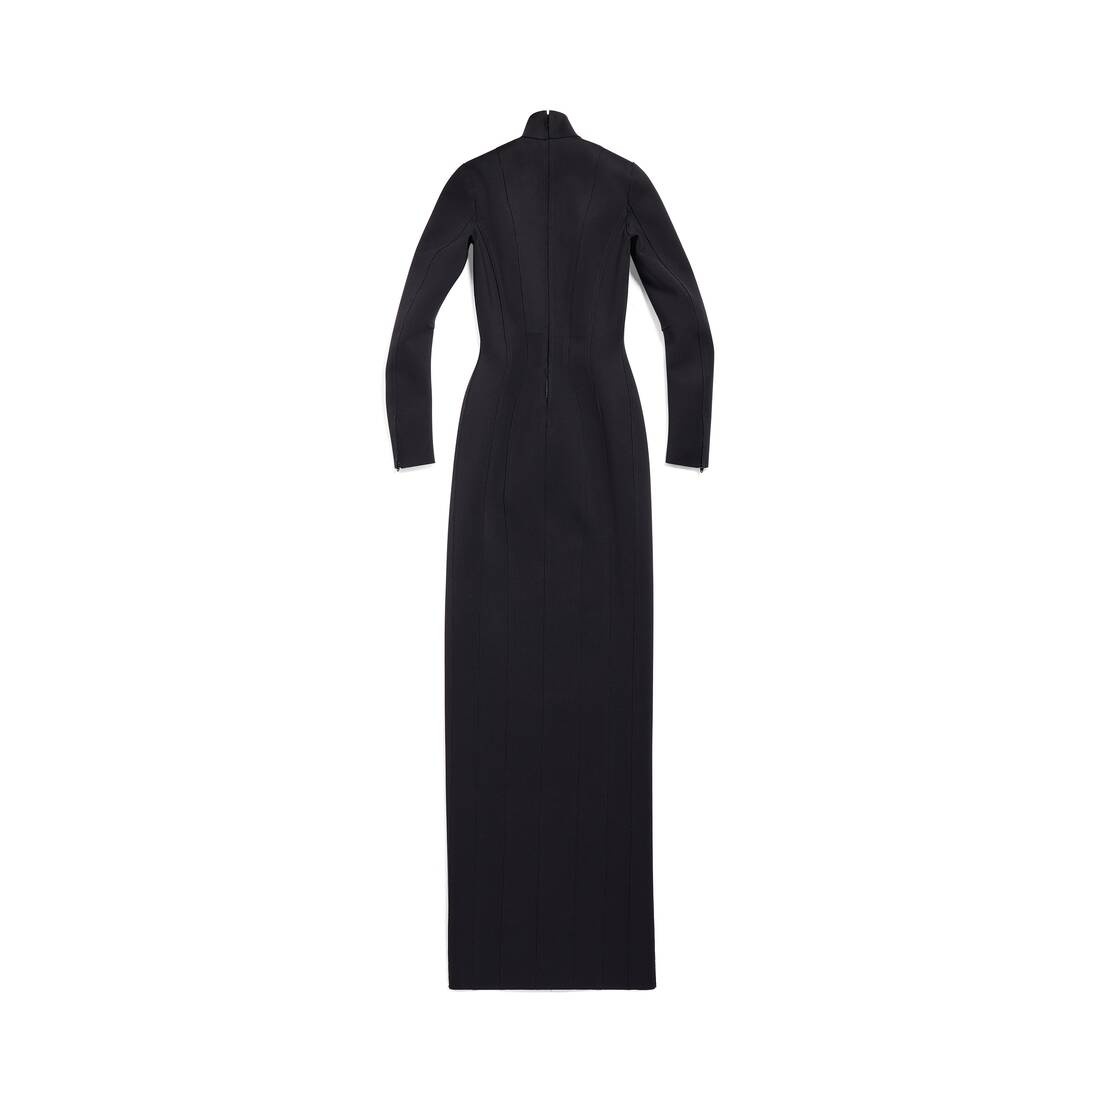 Women's Fitted Gown in Black - 8